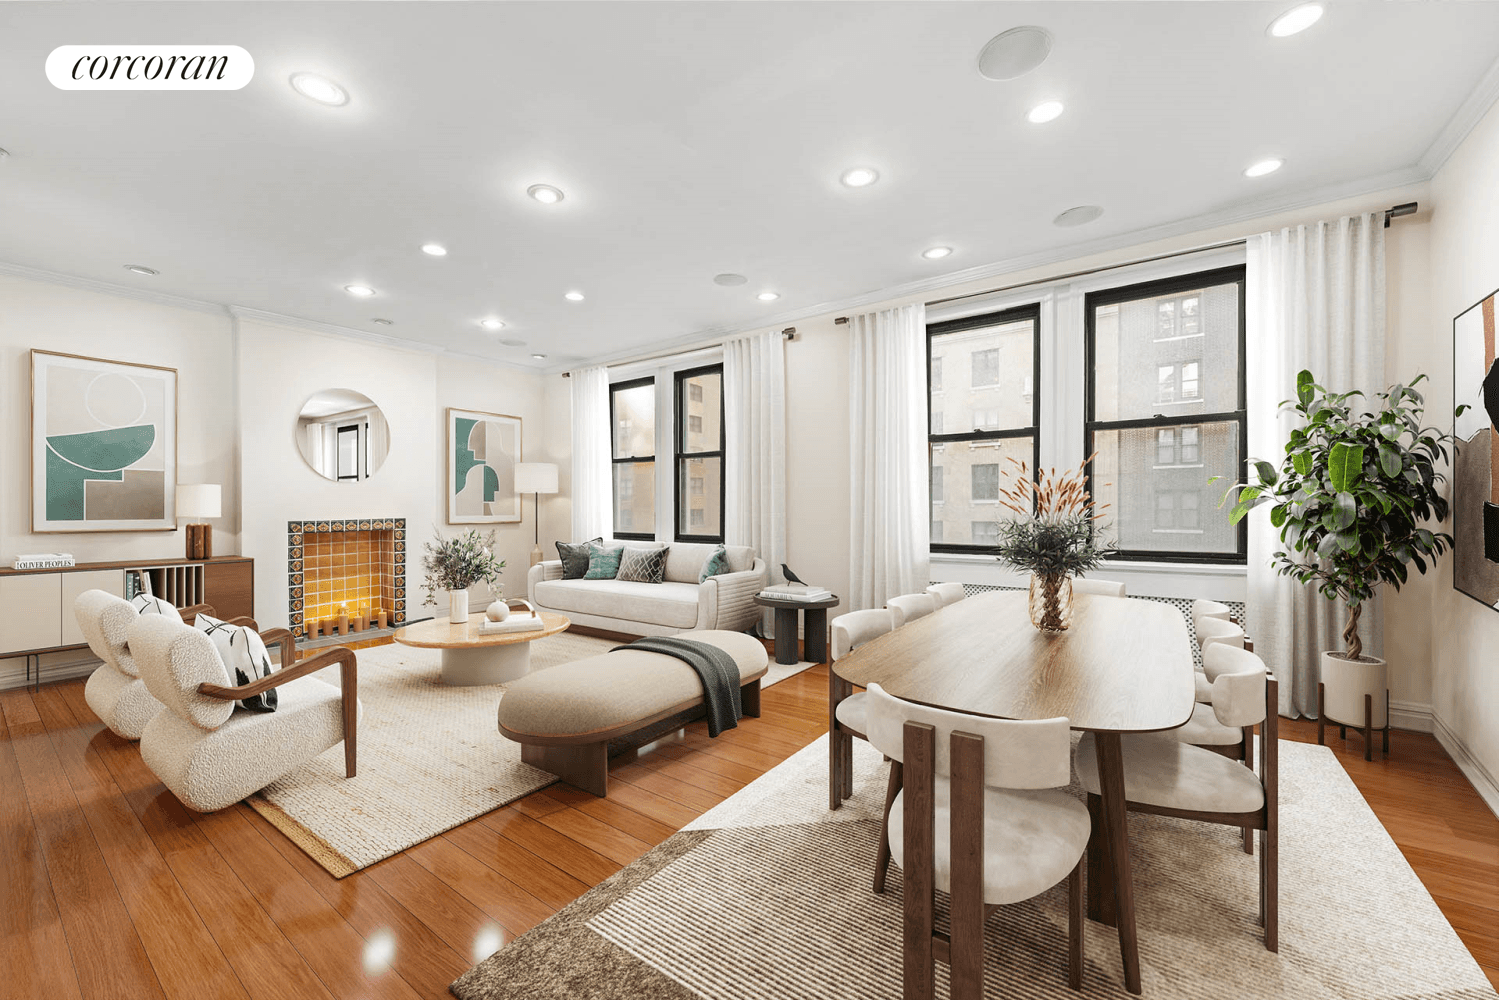 Top Floor Expansive 2 Bed 2 Bath Pre war Home with Central AirSituated in a gorgeous boutique co op in the heart of Carnegie Hill, residence 75 is a sprawling ...